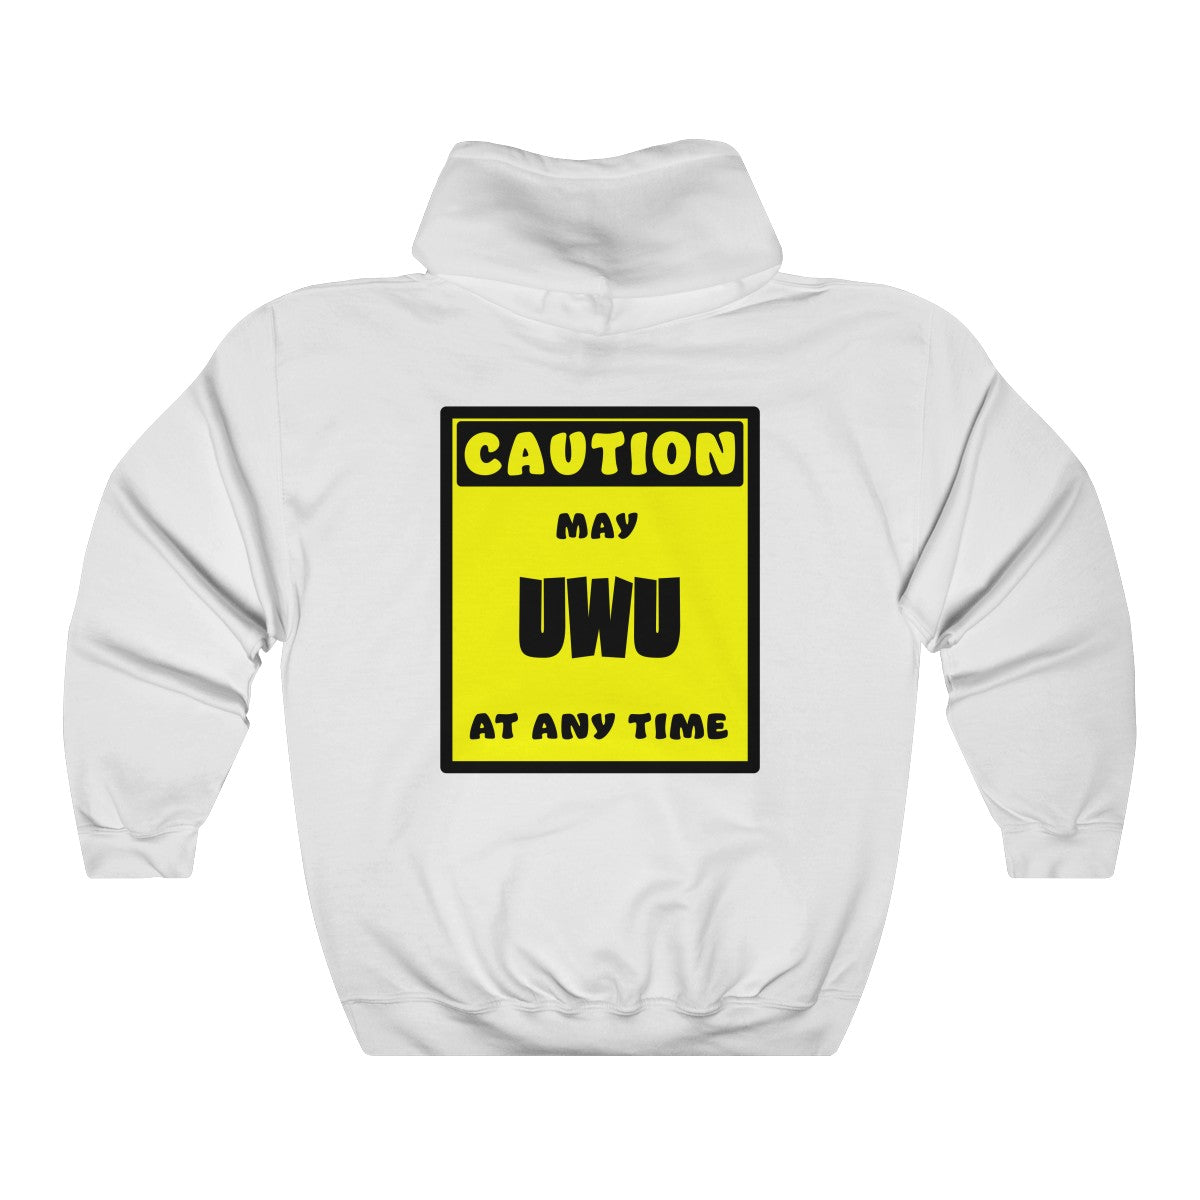 CAUTION! May UWU at any time! - Hoodie Hoodie AFLT-Whootorca White S 